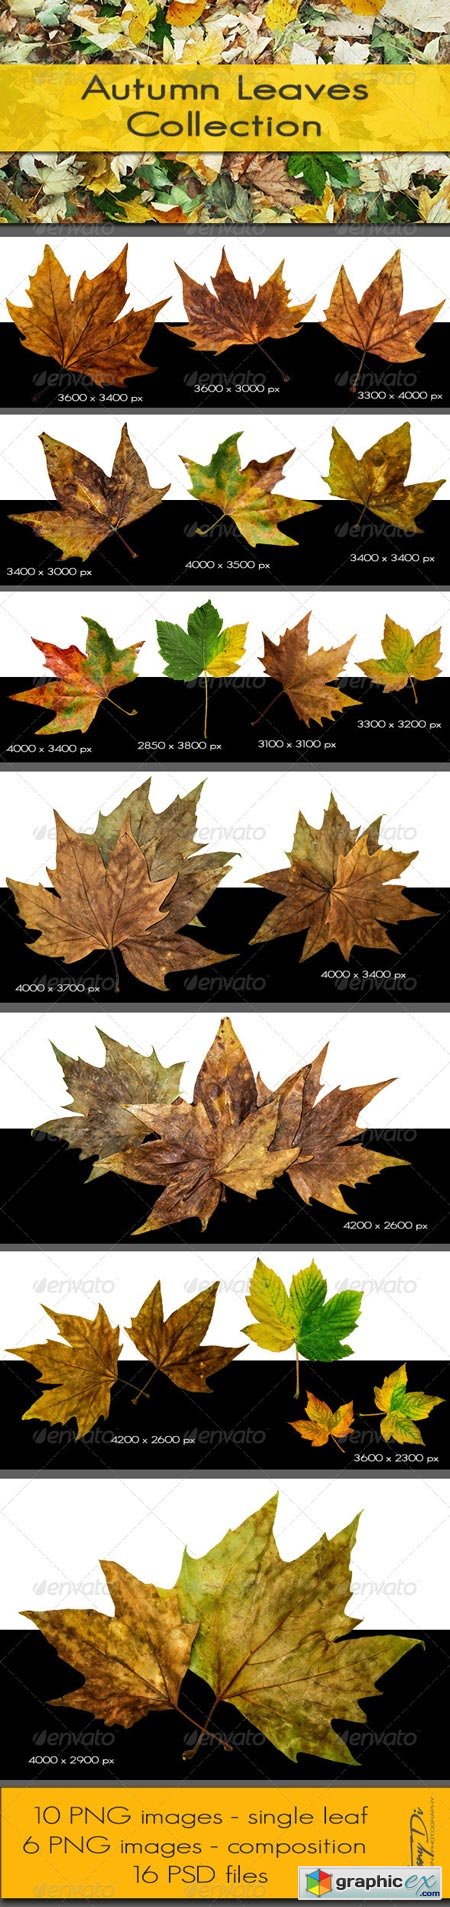 Autumn Leaves Collection 5697592